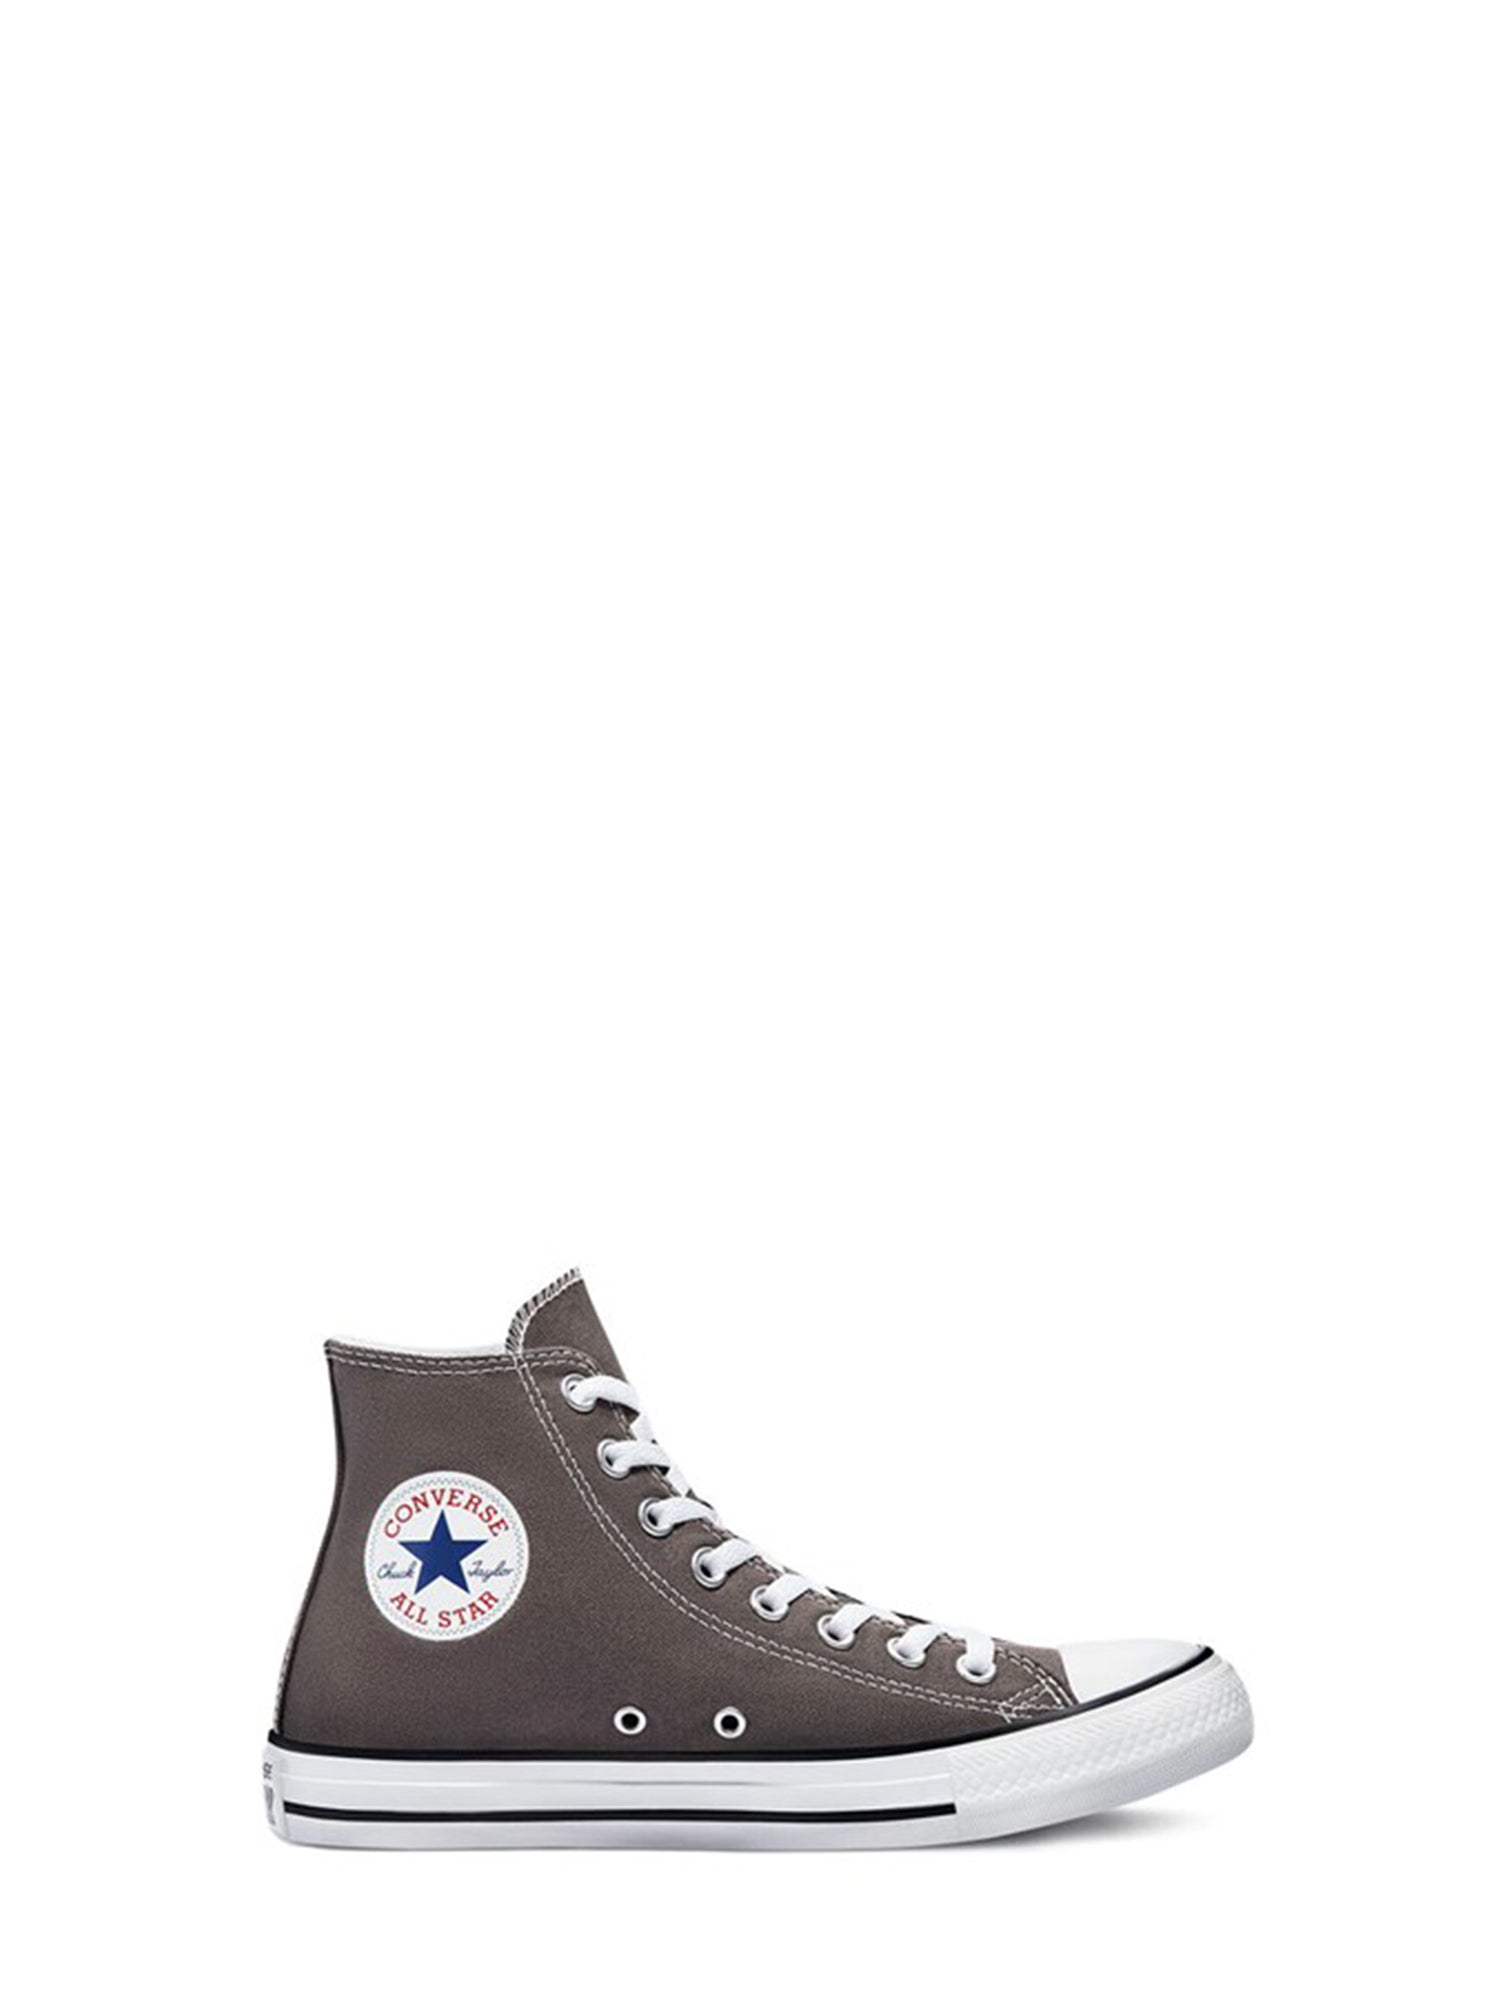 CONVERSE SNEAKERS CHUCK TAYLOR ALL STAR ANTRACITE